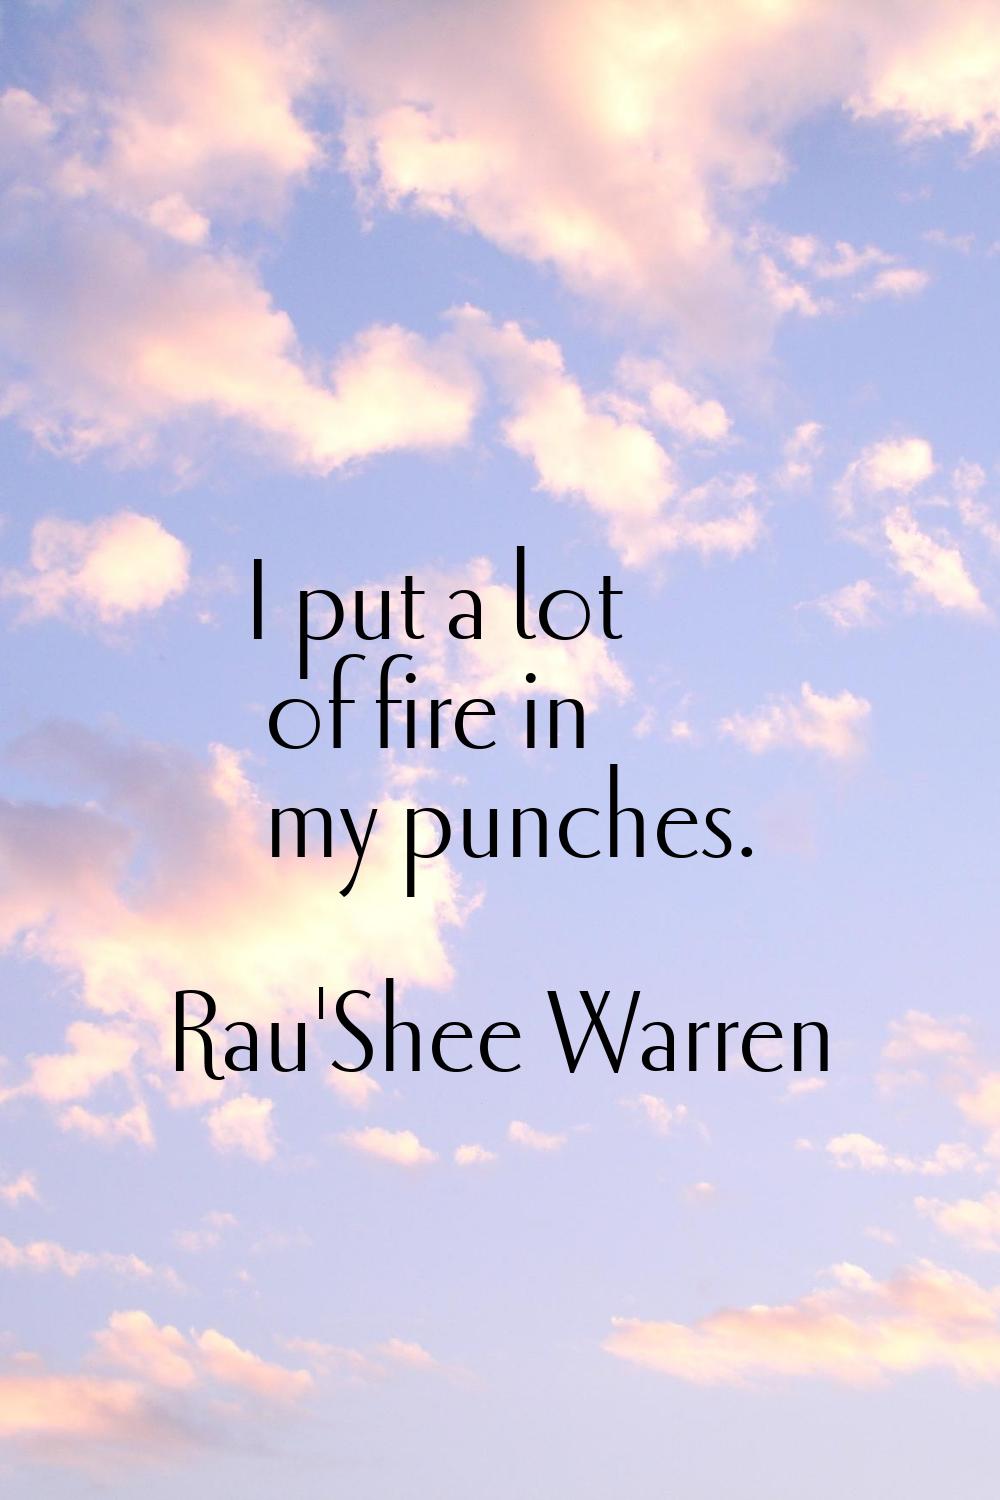 I put a lot of fire in my punches.